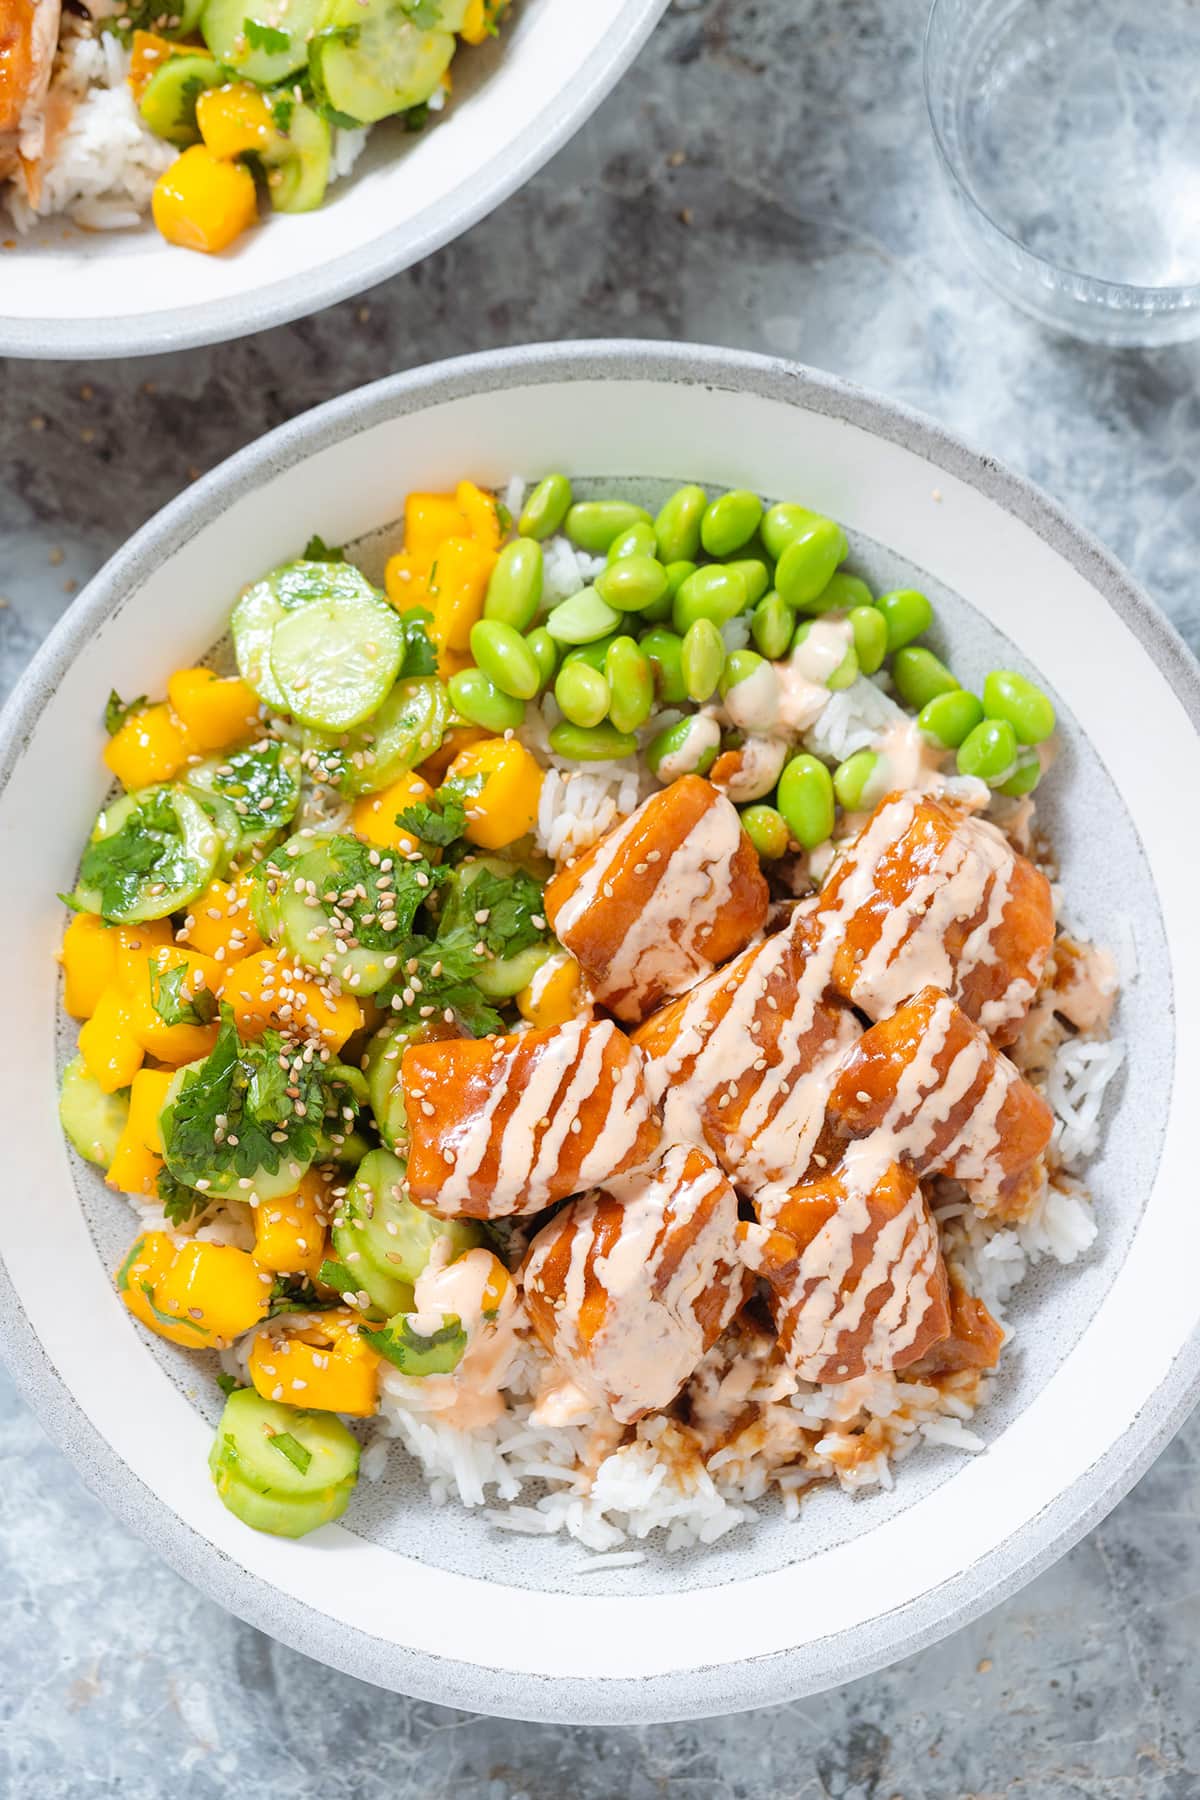 Diced teriyaki salmon with mango salad, edamame, and rice drizzled with spicy mayo in a grey bowl on a grey background.